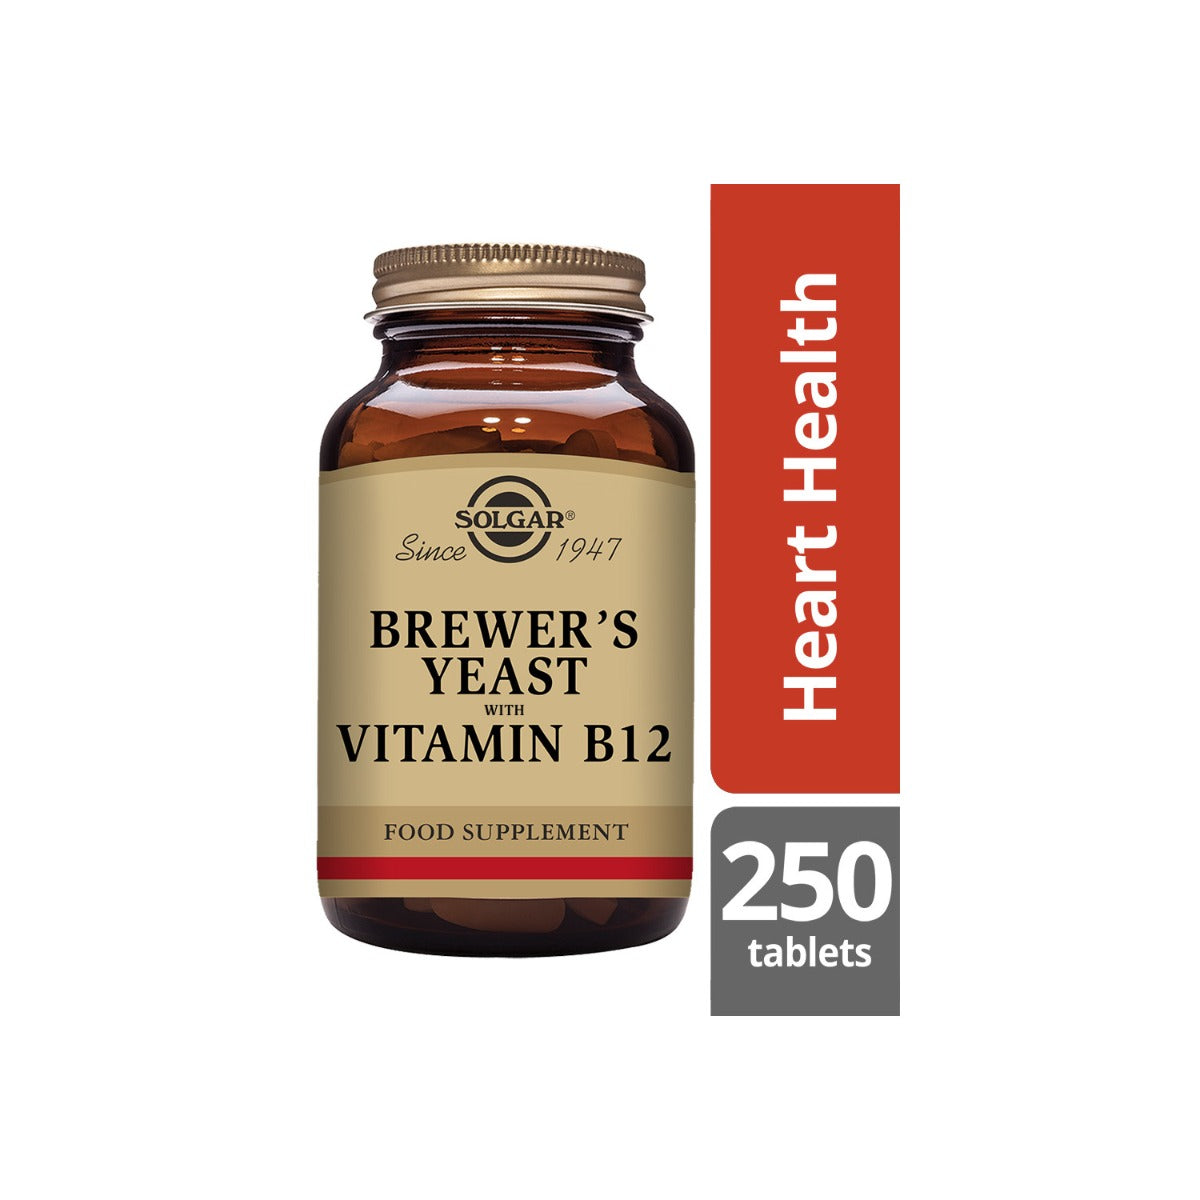 Solgar® Brewer's Yeast with Vitamin B12 Tablets - Pack of 250